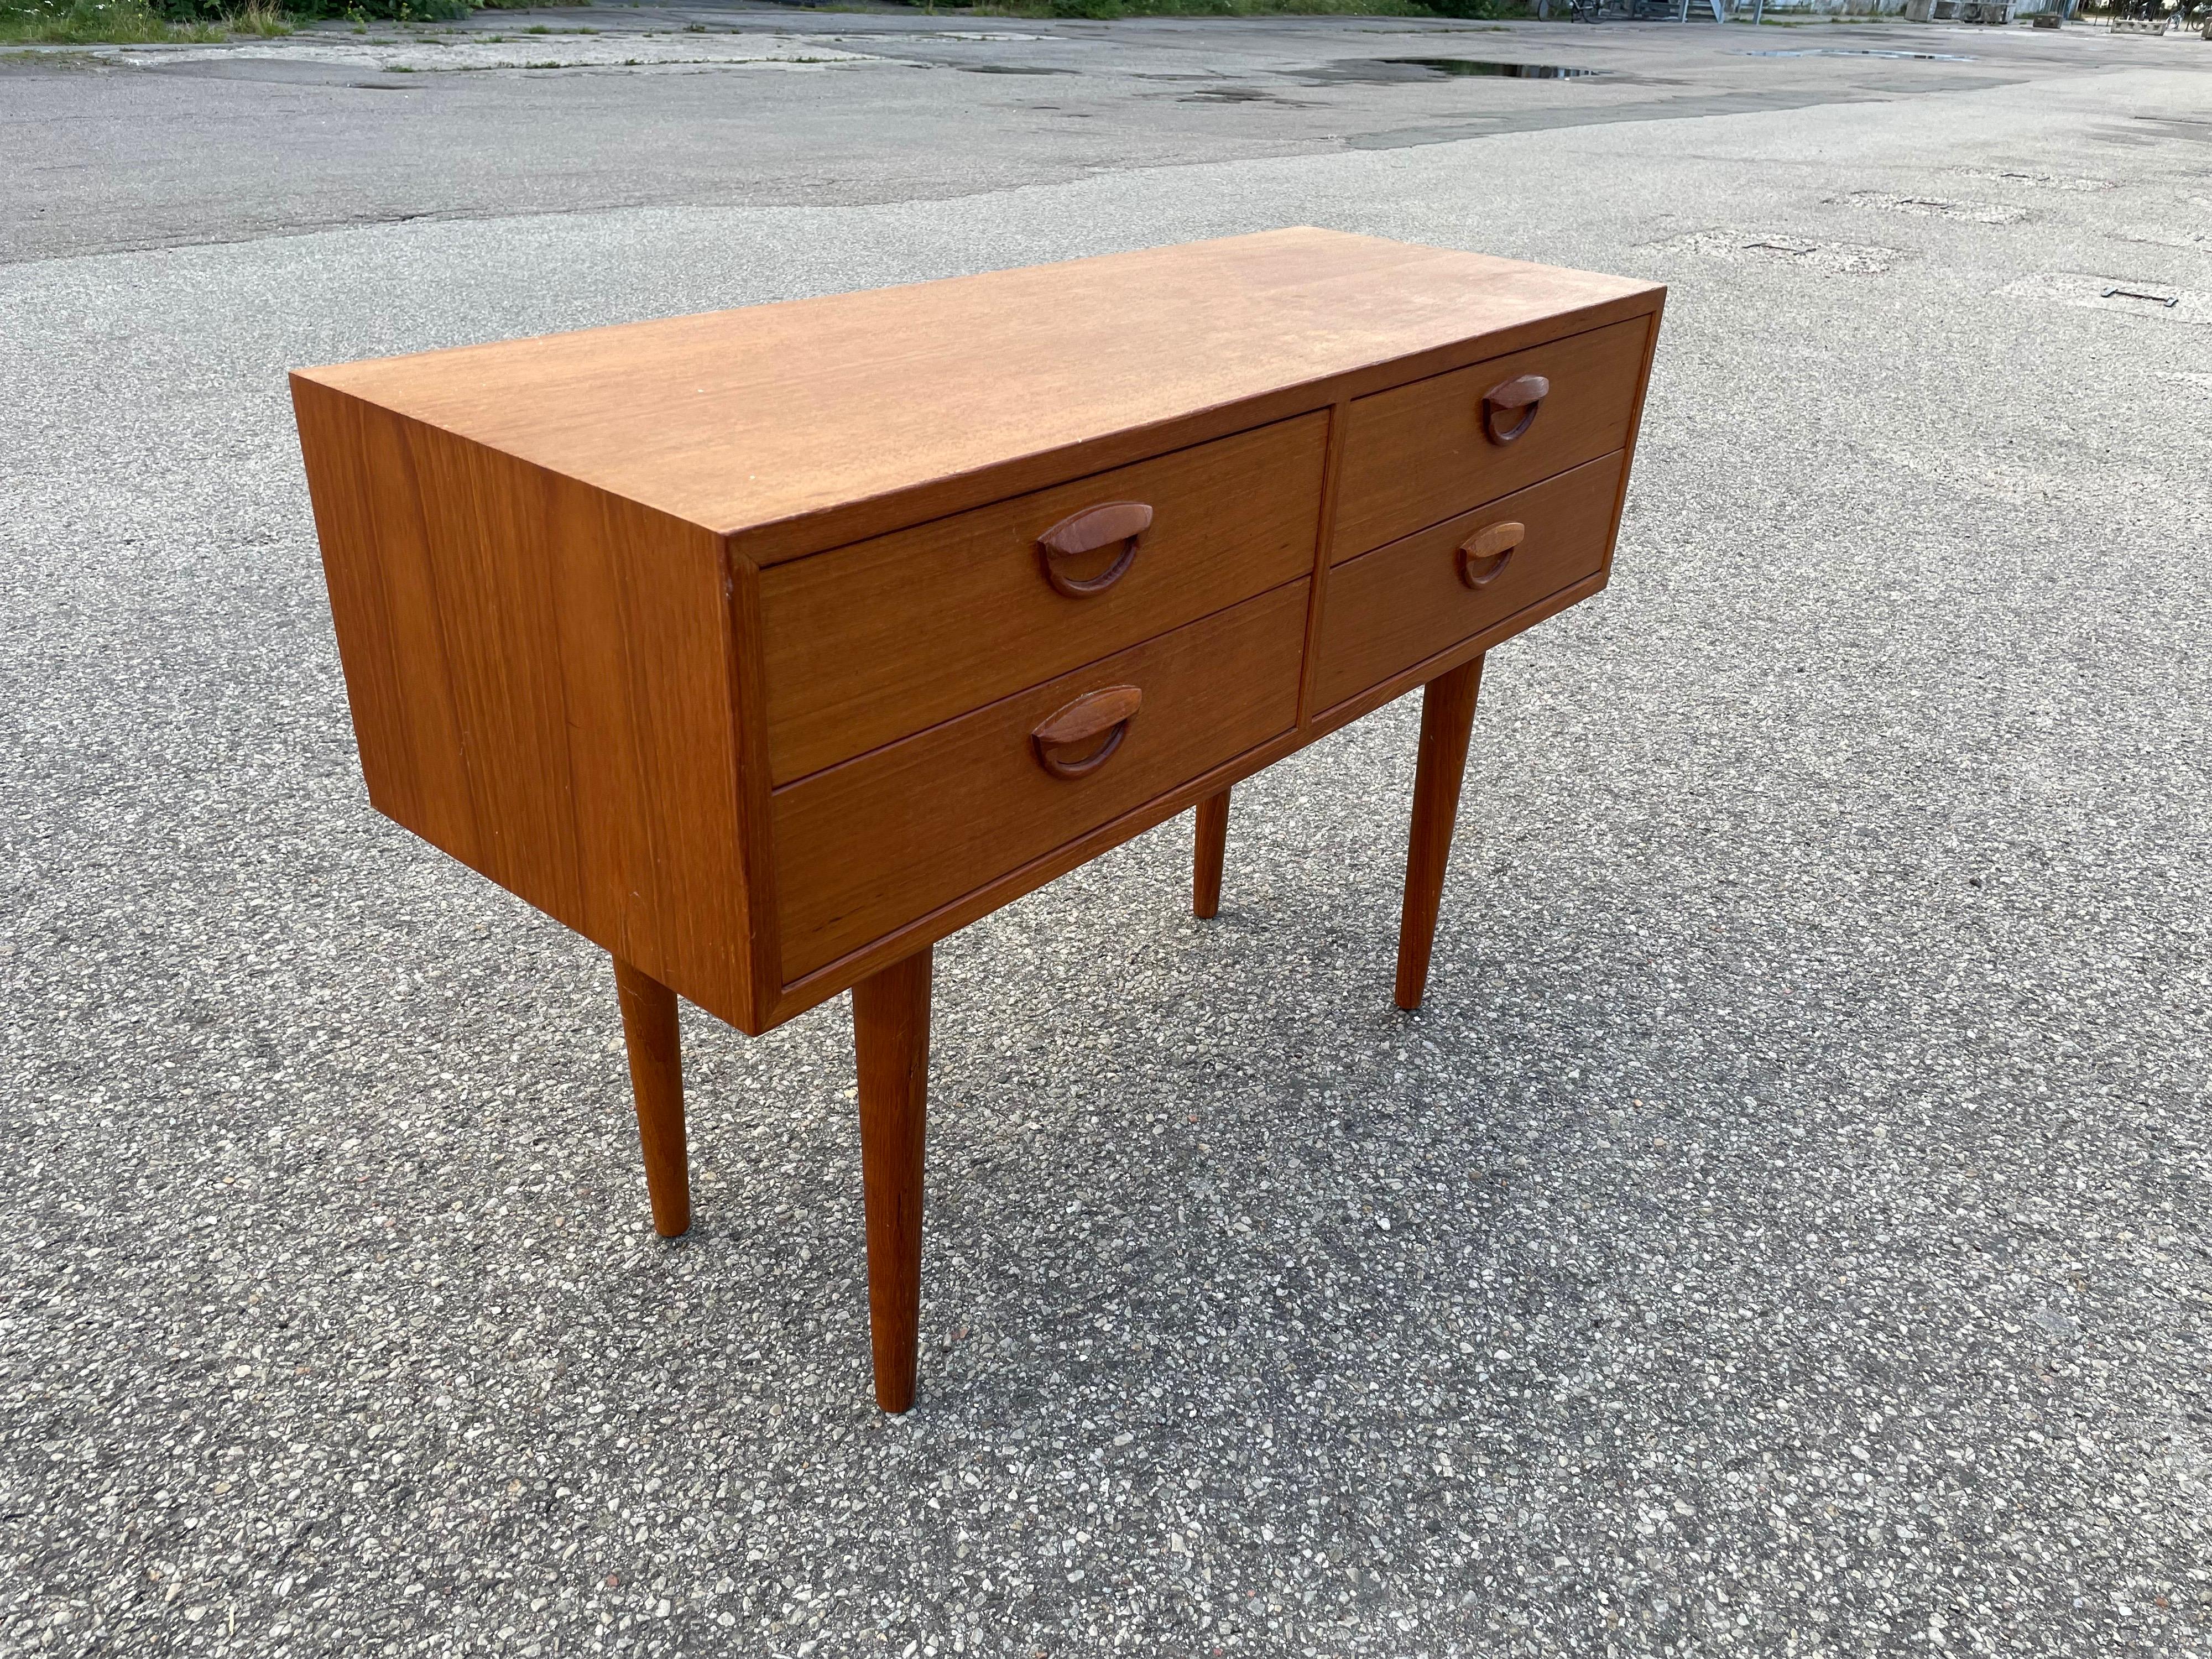 Small sideboard, Beautiful 1960s chest of drawers by Kai Kristiansen for Feldballe Møbelfabrik, good vintage condition, authentic and nice vintage item with fantastic patina. Drawers work well, clean inside. Wonderful intermediate sized storage